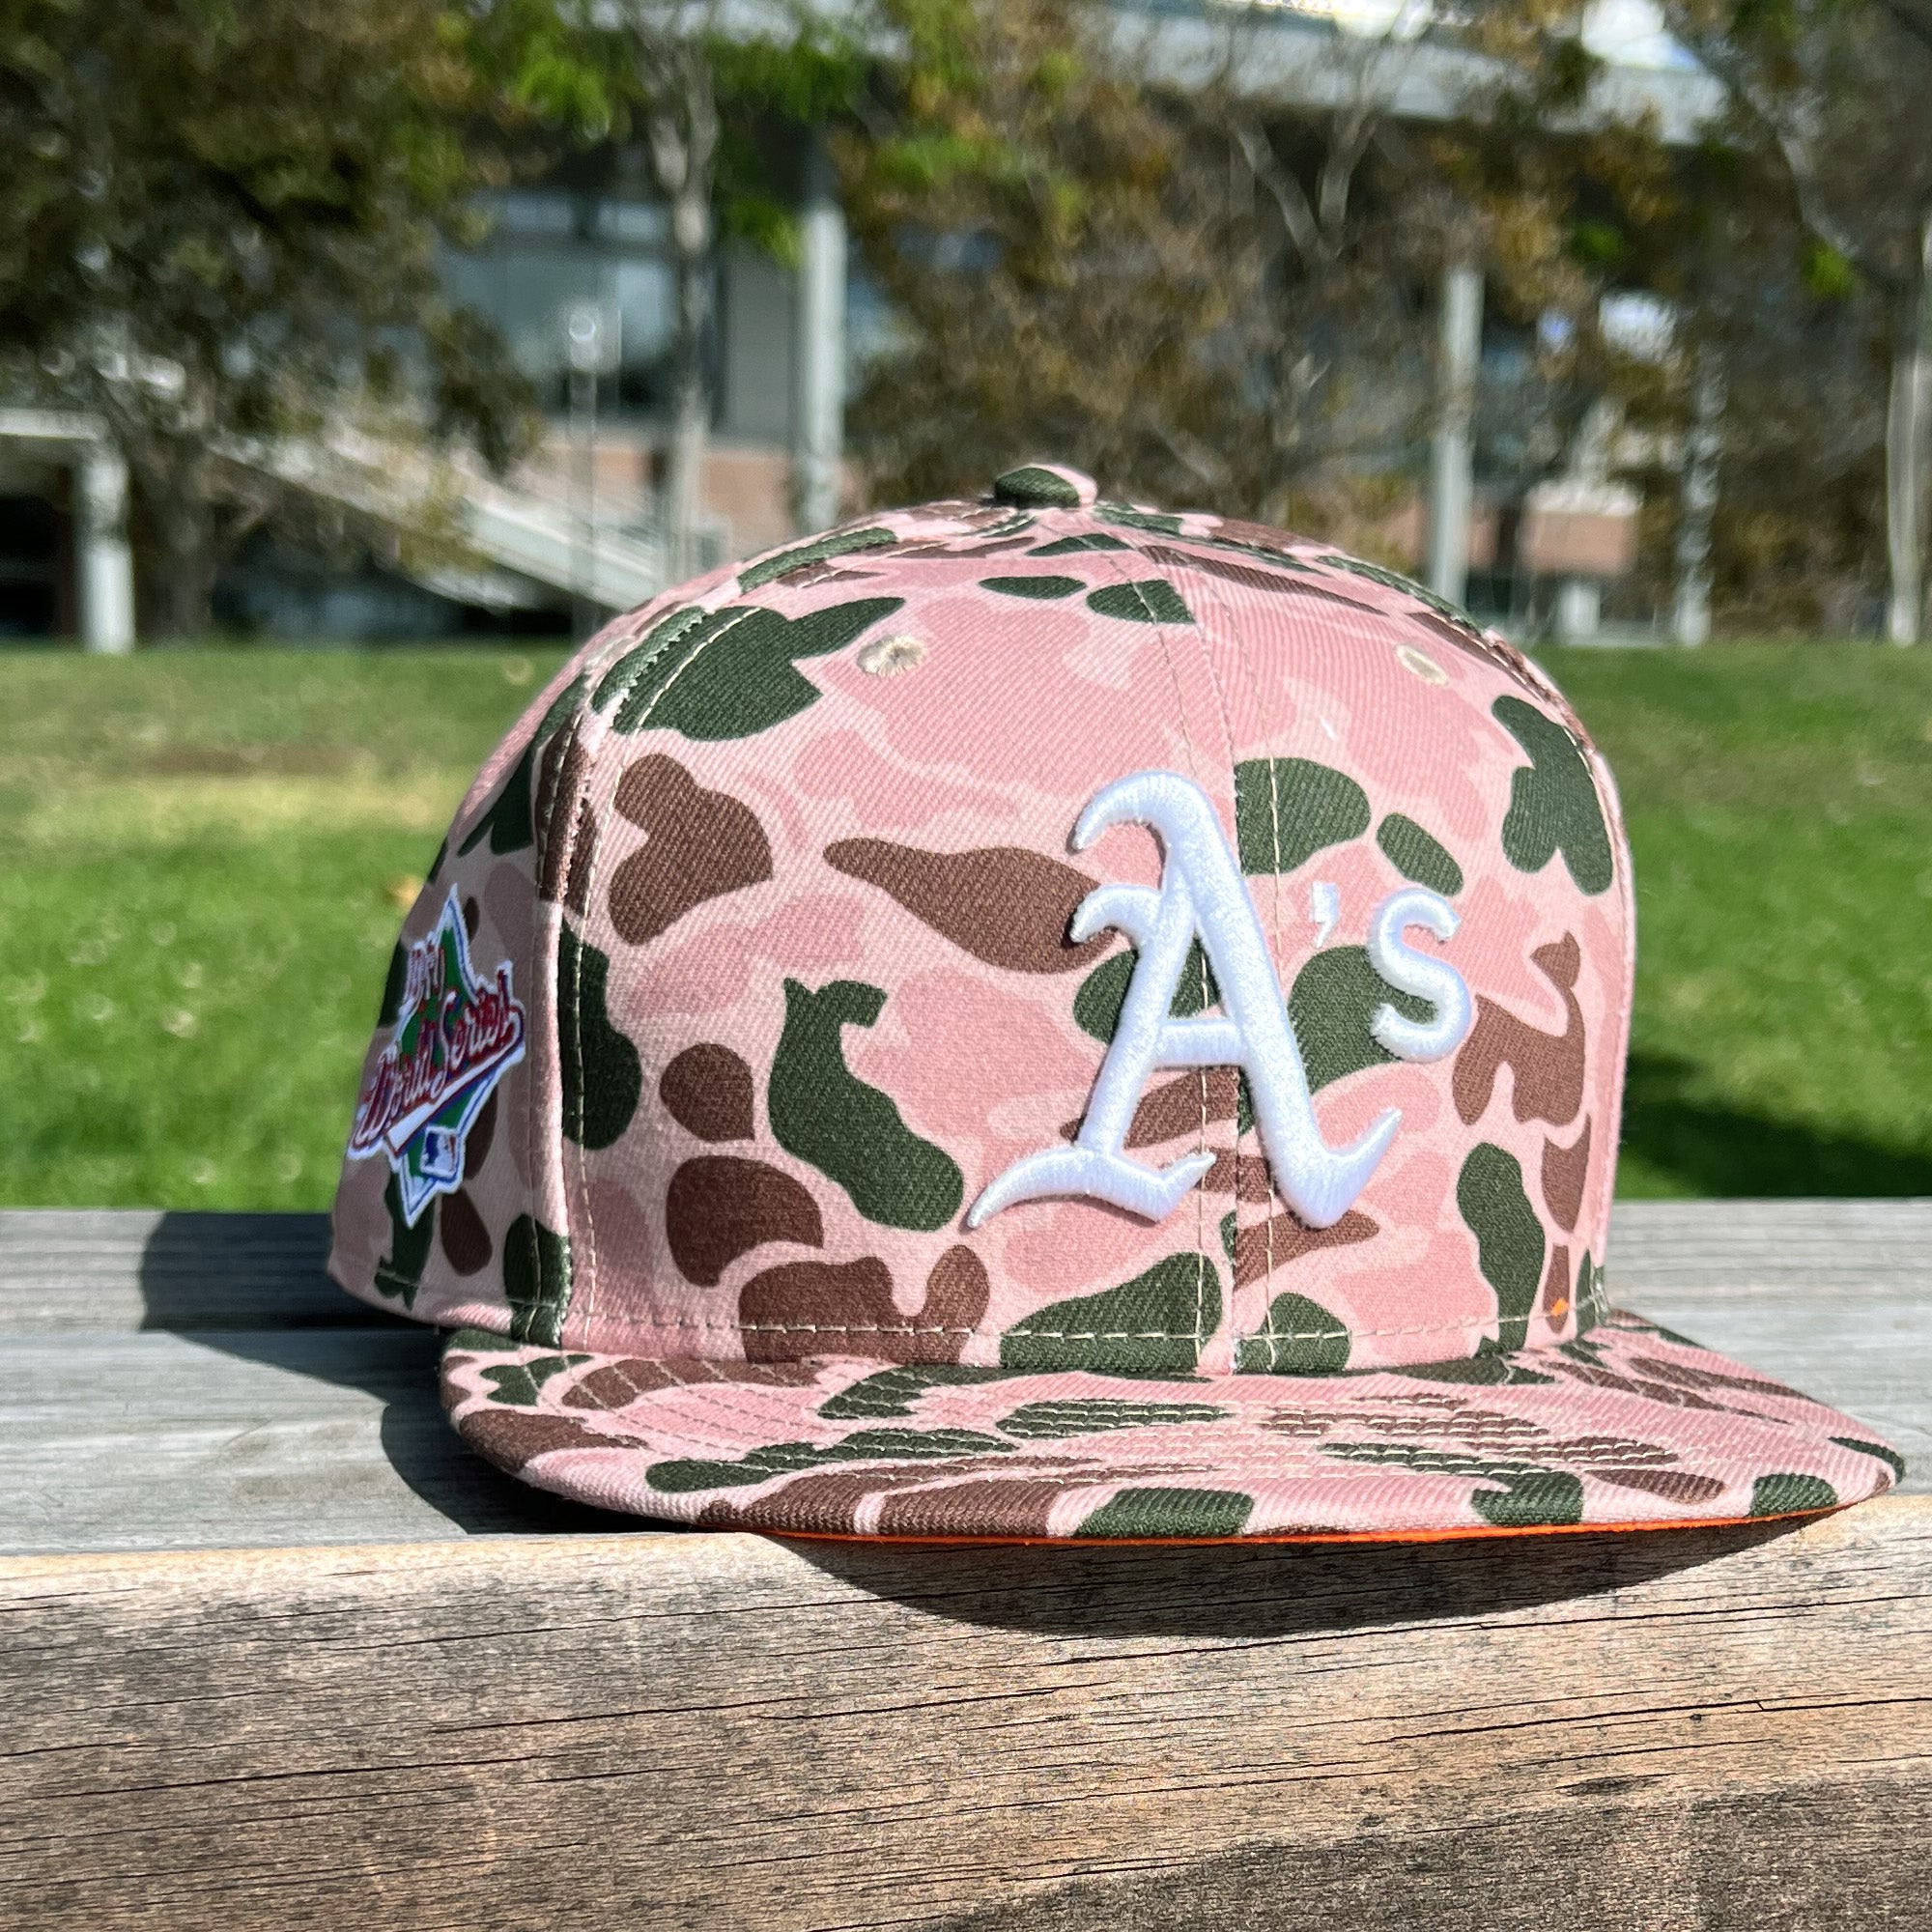 Duck camo cap with an embroidered Oakland As the logo on the crown and World Series 1989 patch on the right wear side sitting on an outdoor picnic table.